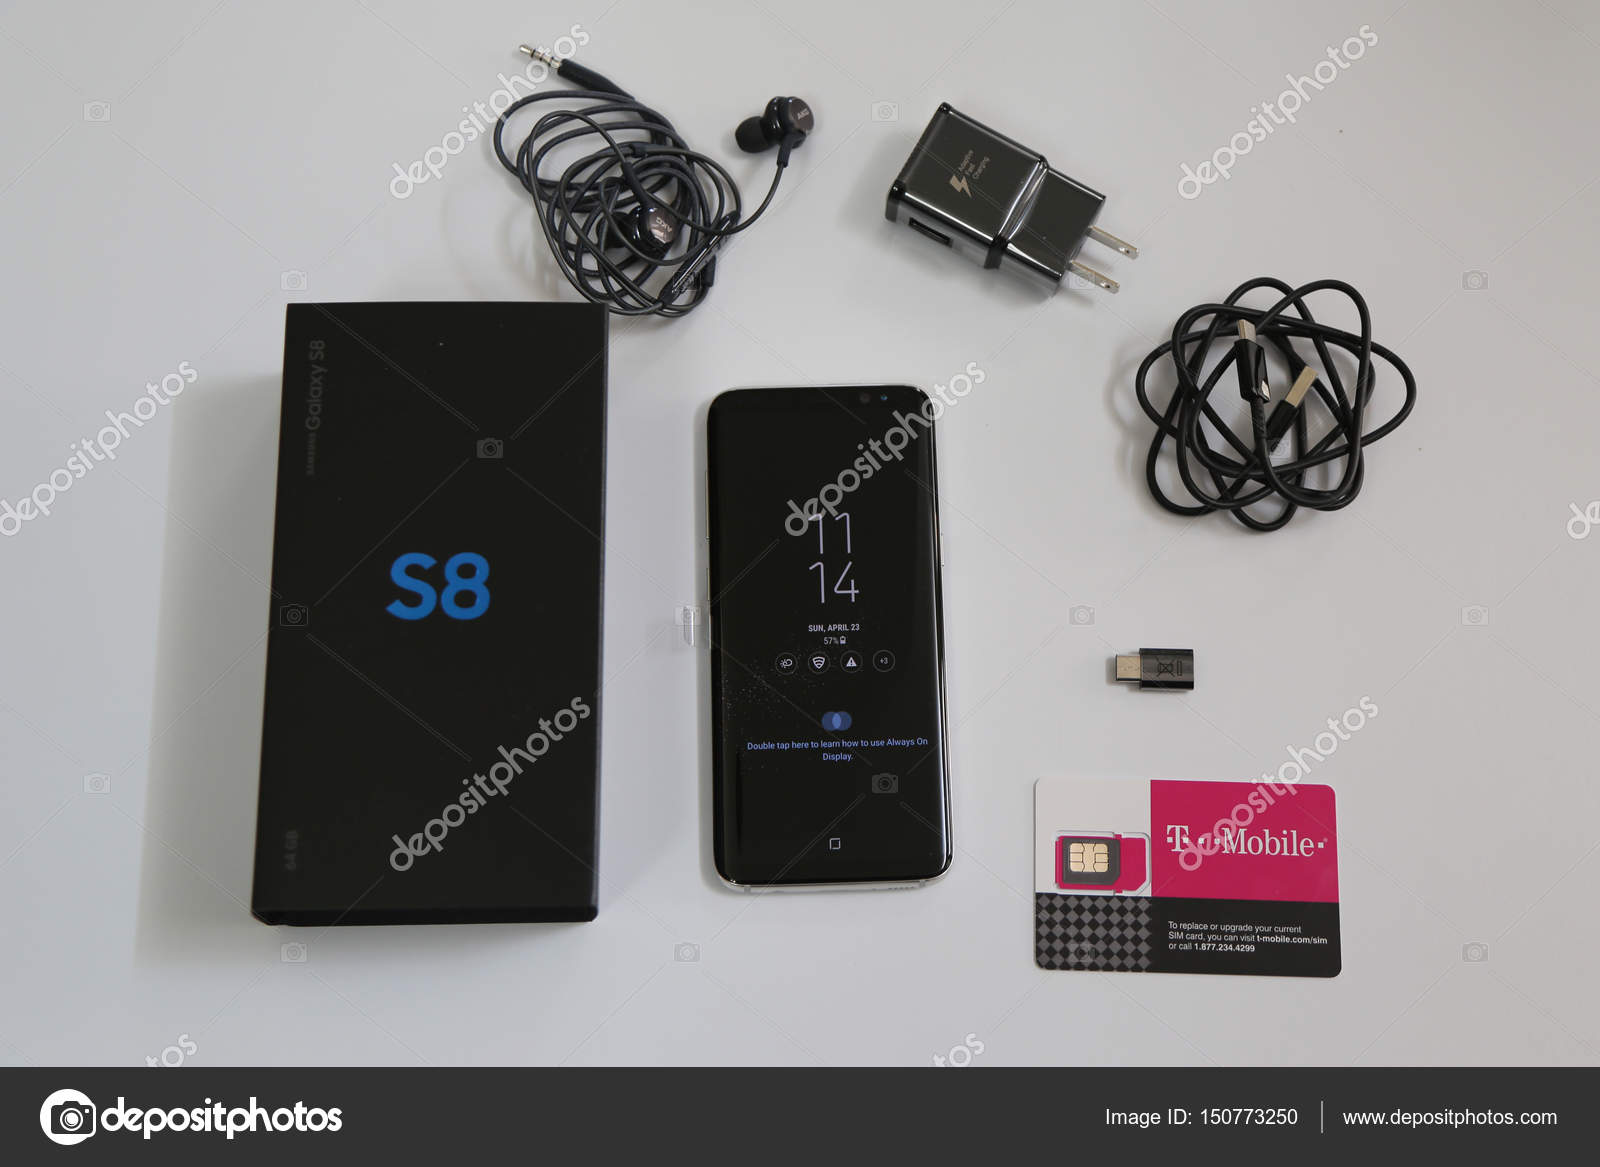 Samsung newest phone Galaxy S8 with accessories now being T-Mobile pre-order customers – Stock Editorial Photo © #150773250